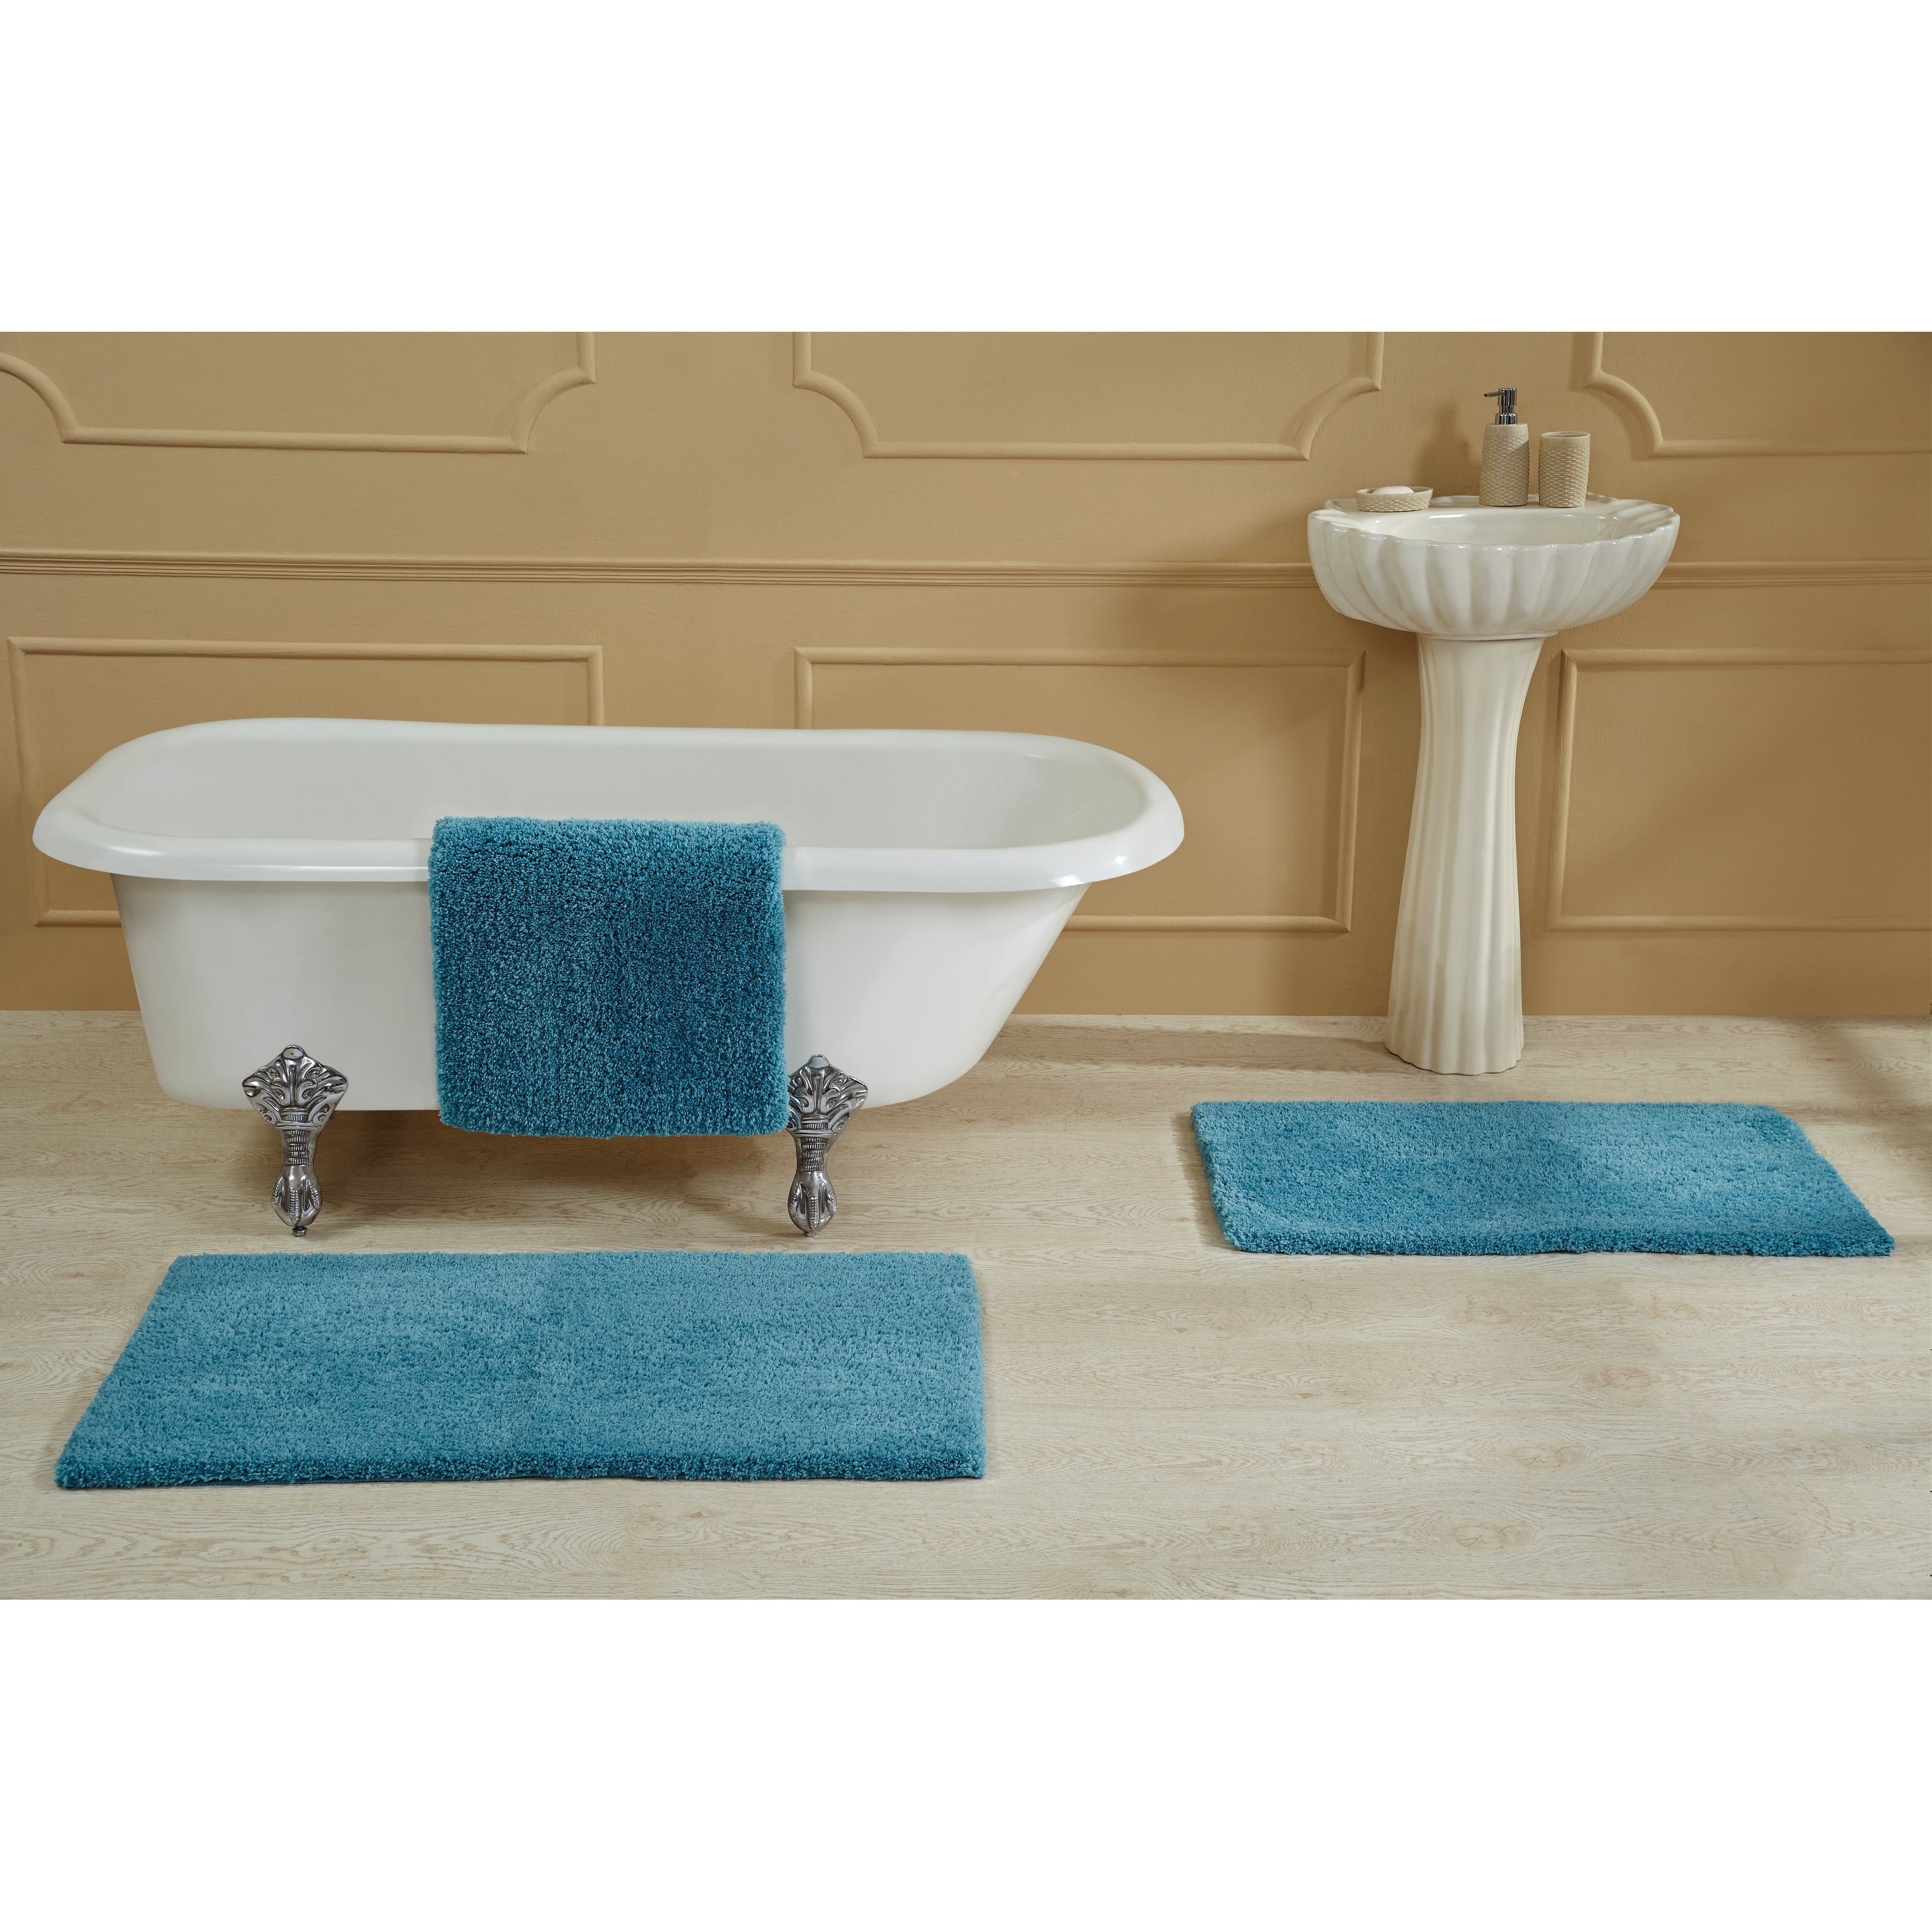 Set of 5 Gradiation Rug Collection Turquoise Cotton Tufted Bath Rug Set -  Home Weavers